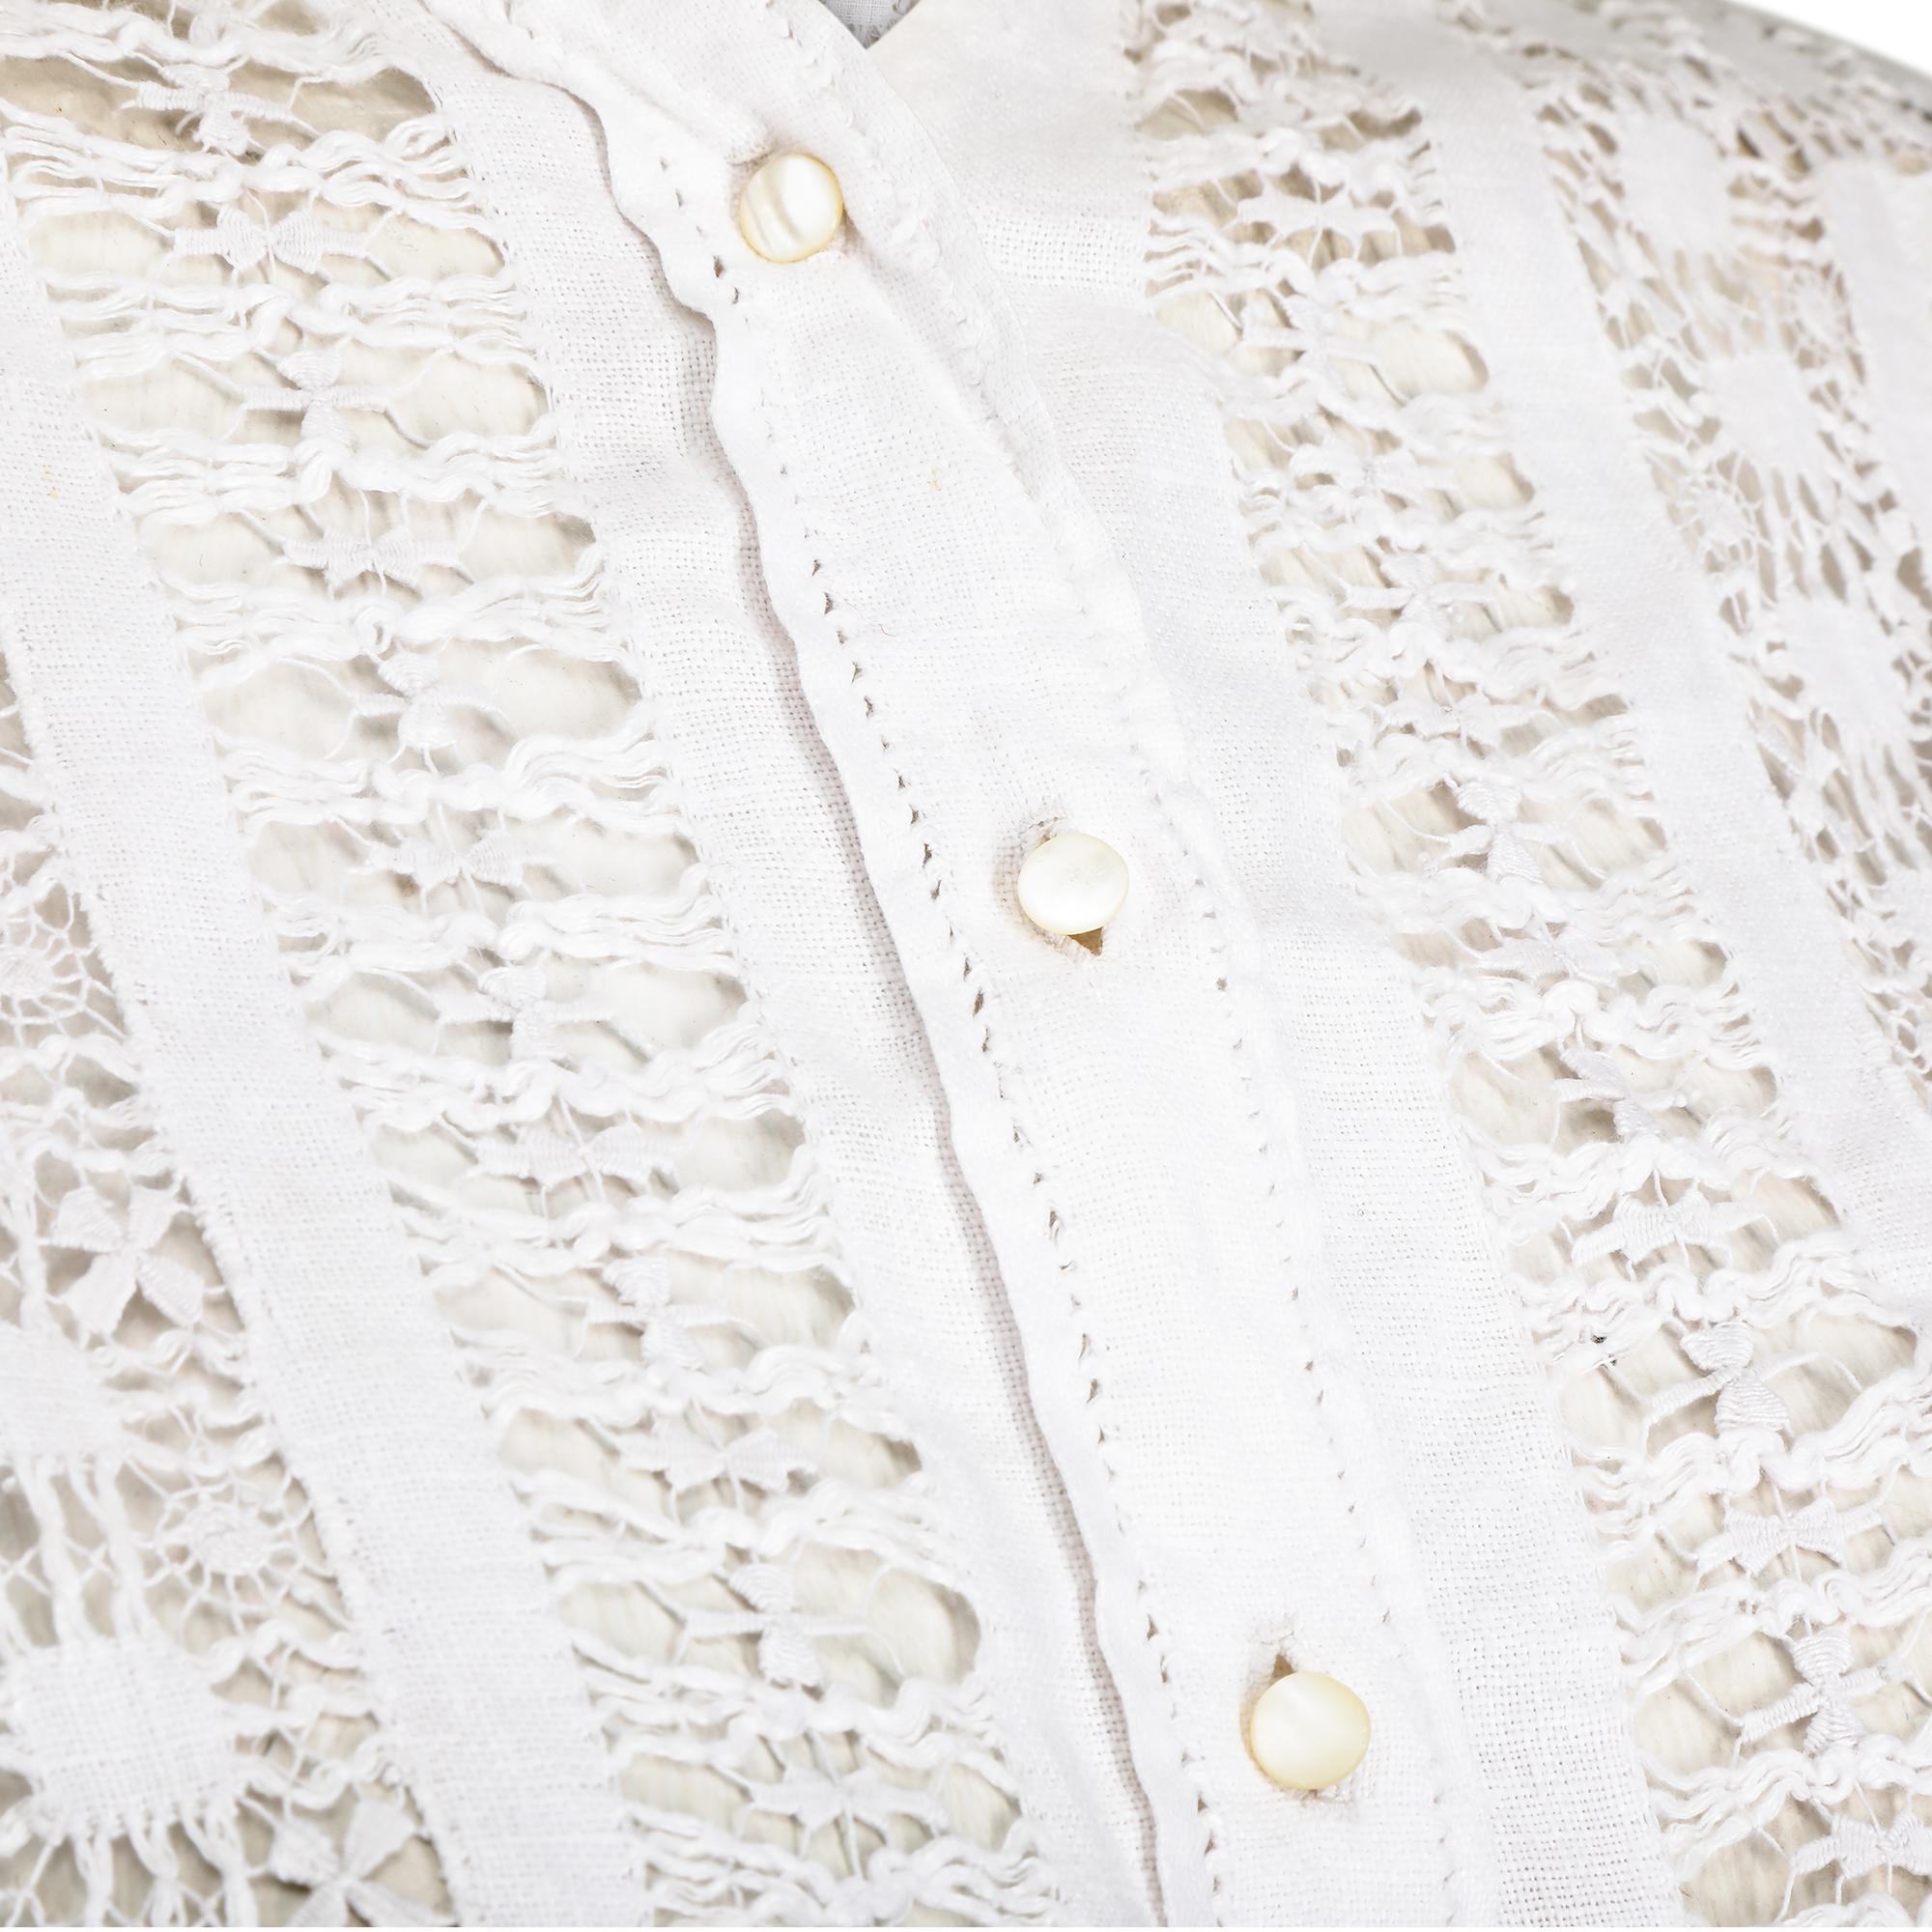 Women's Antique Edwardian White Linen Blouse With Cut Out Work